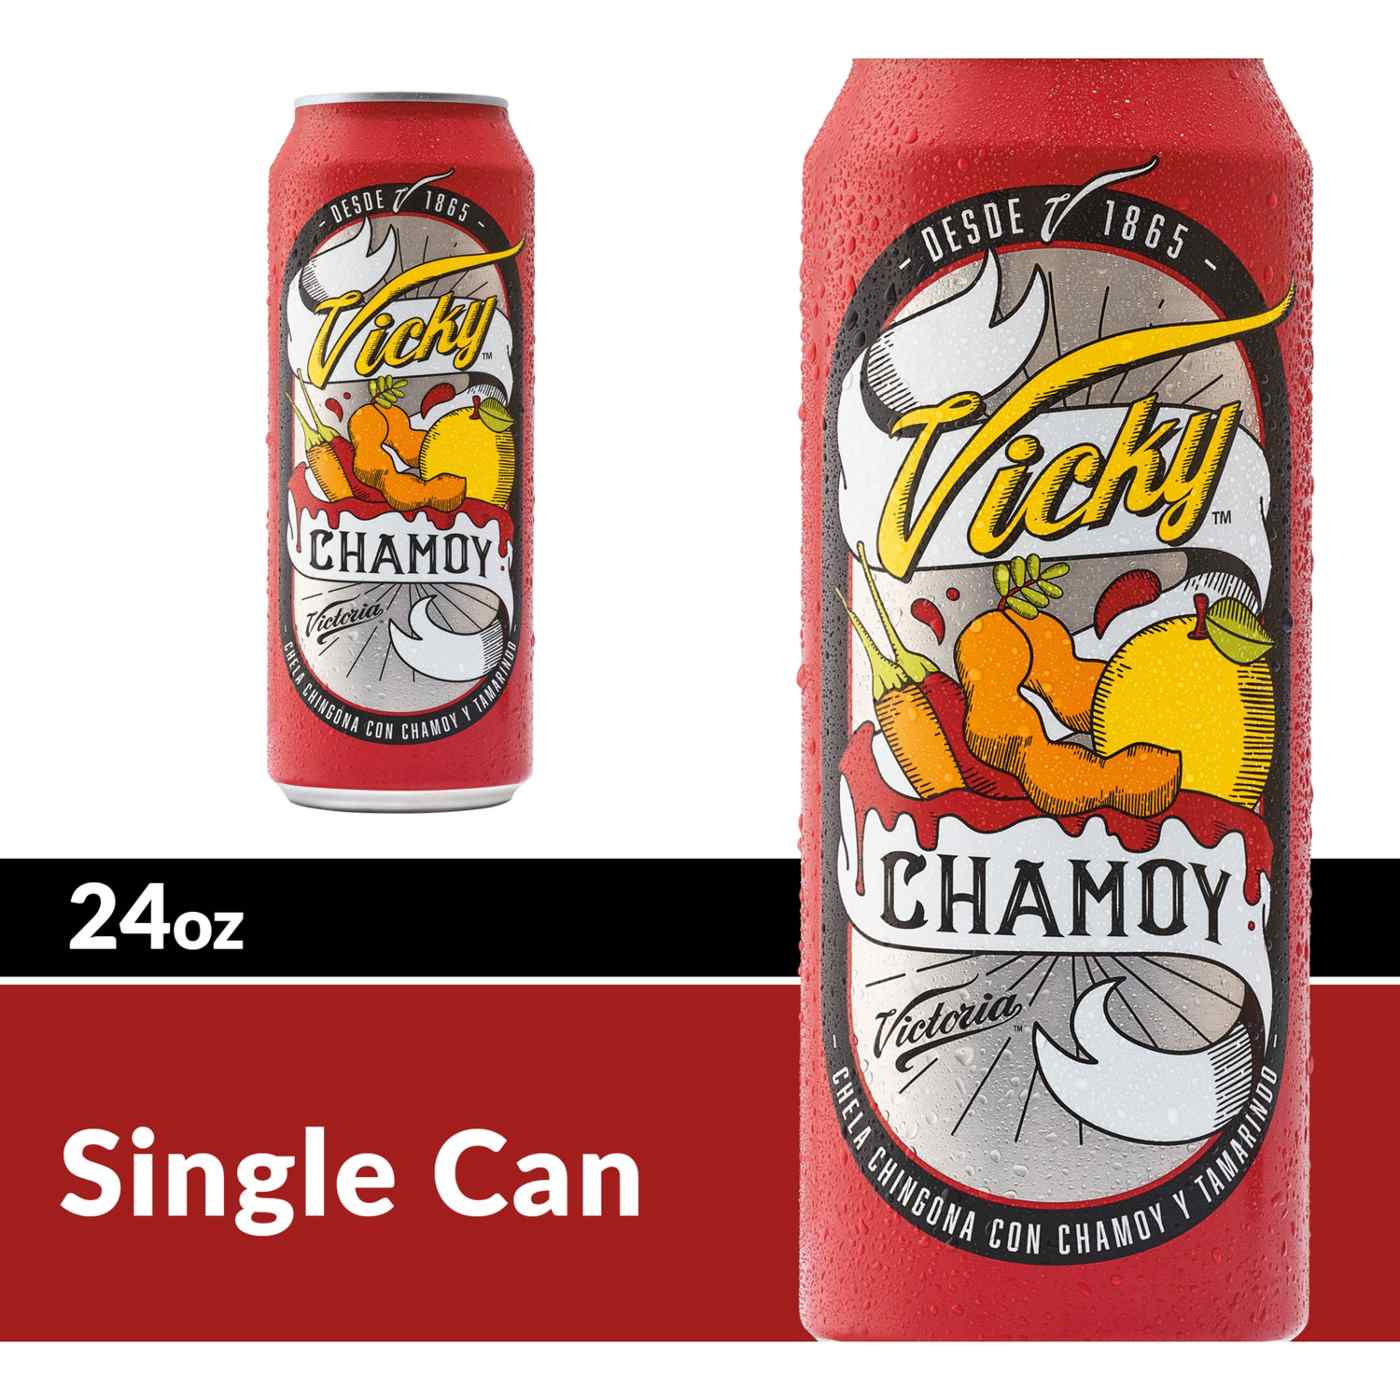 Victoria Vicky Chamoy Mexican Flavored Beer 24 oz Can; image 9 of 9